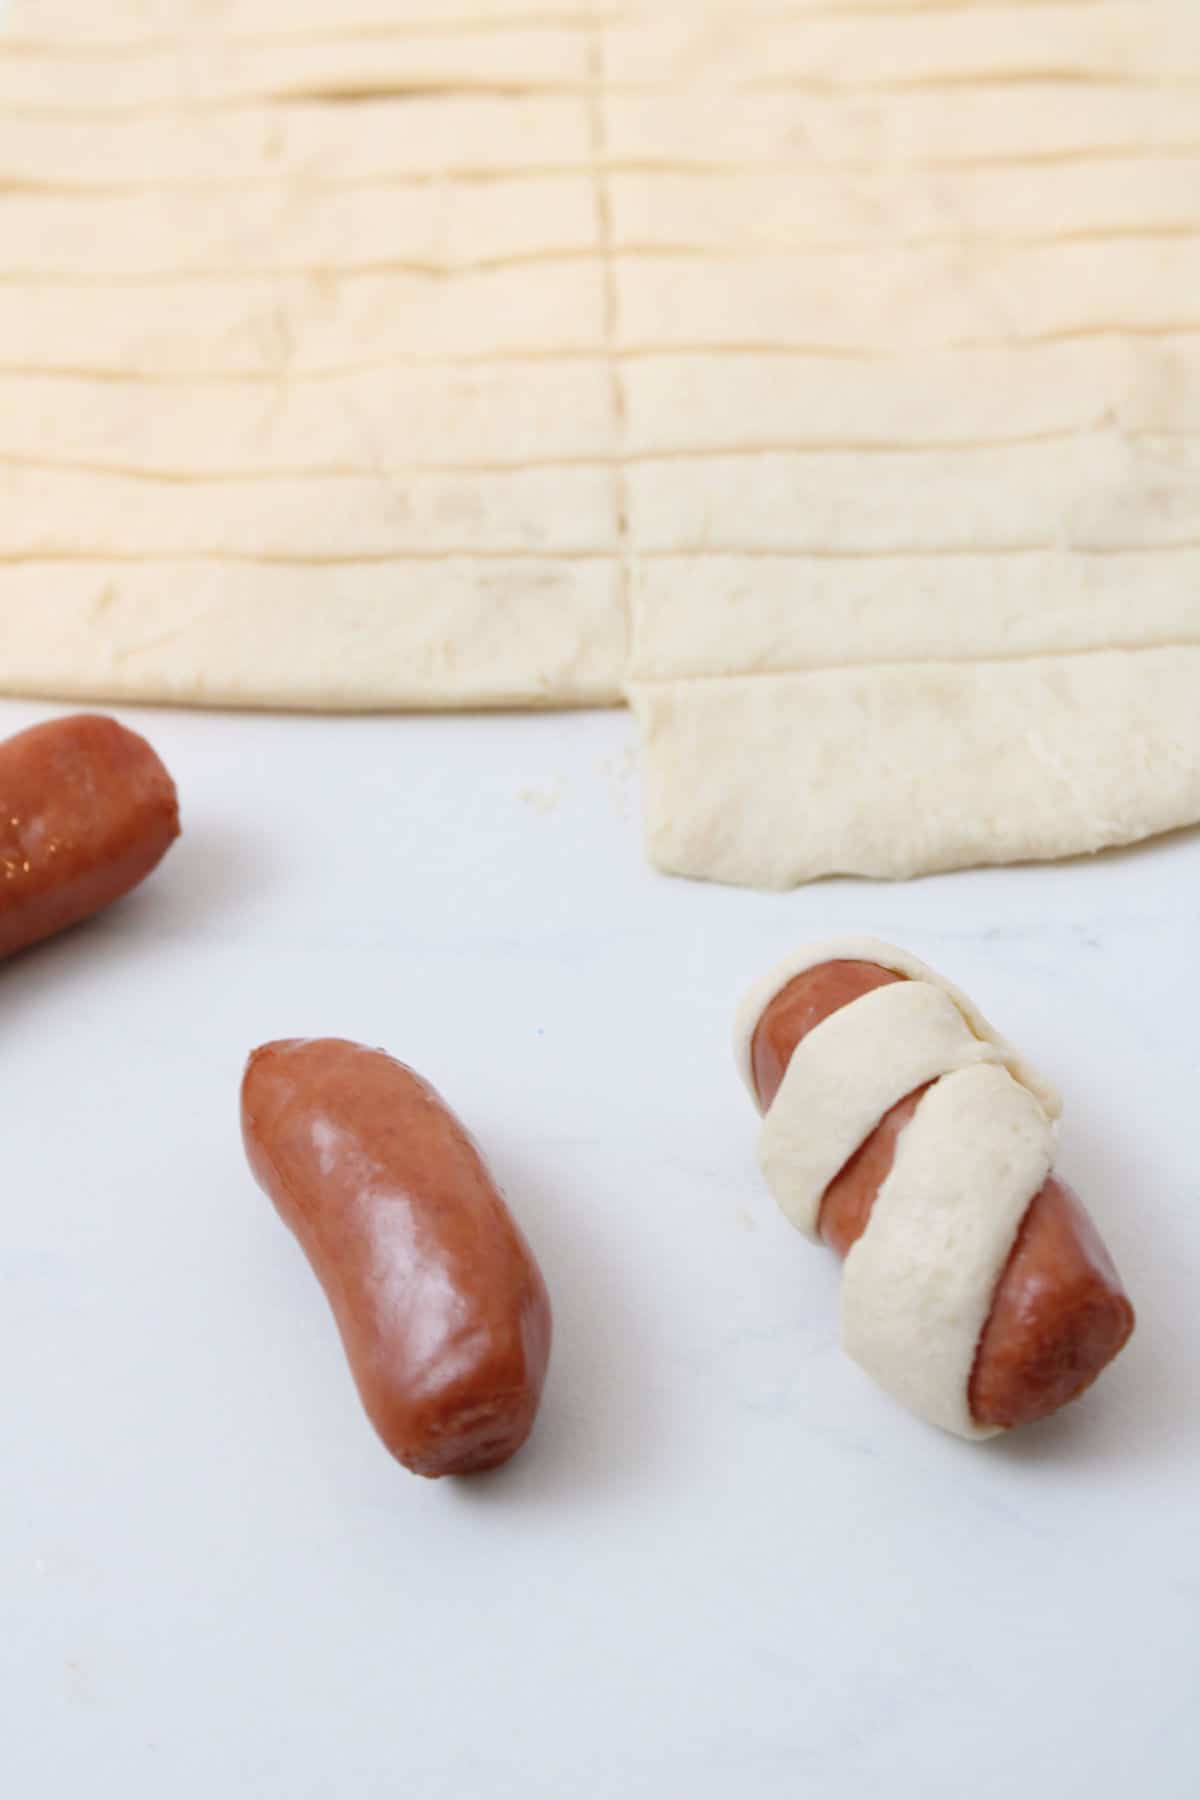 wrapping mini hot dogs in strips of crescent roll dough.